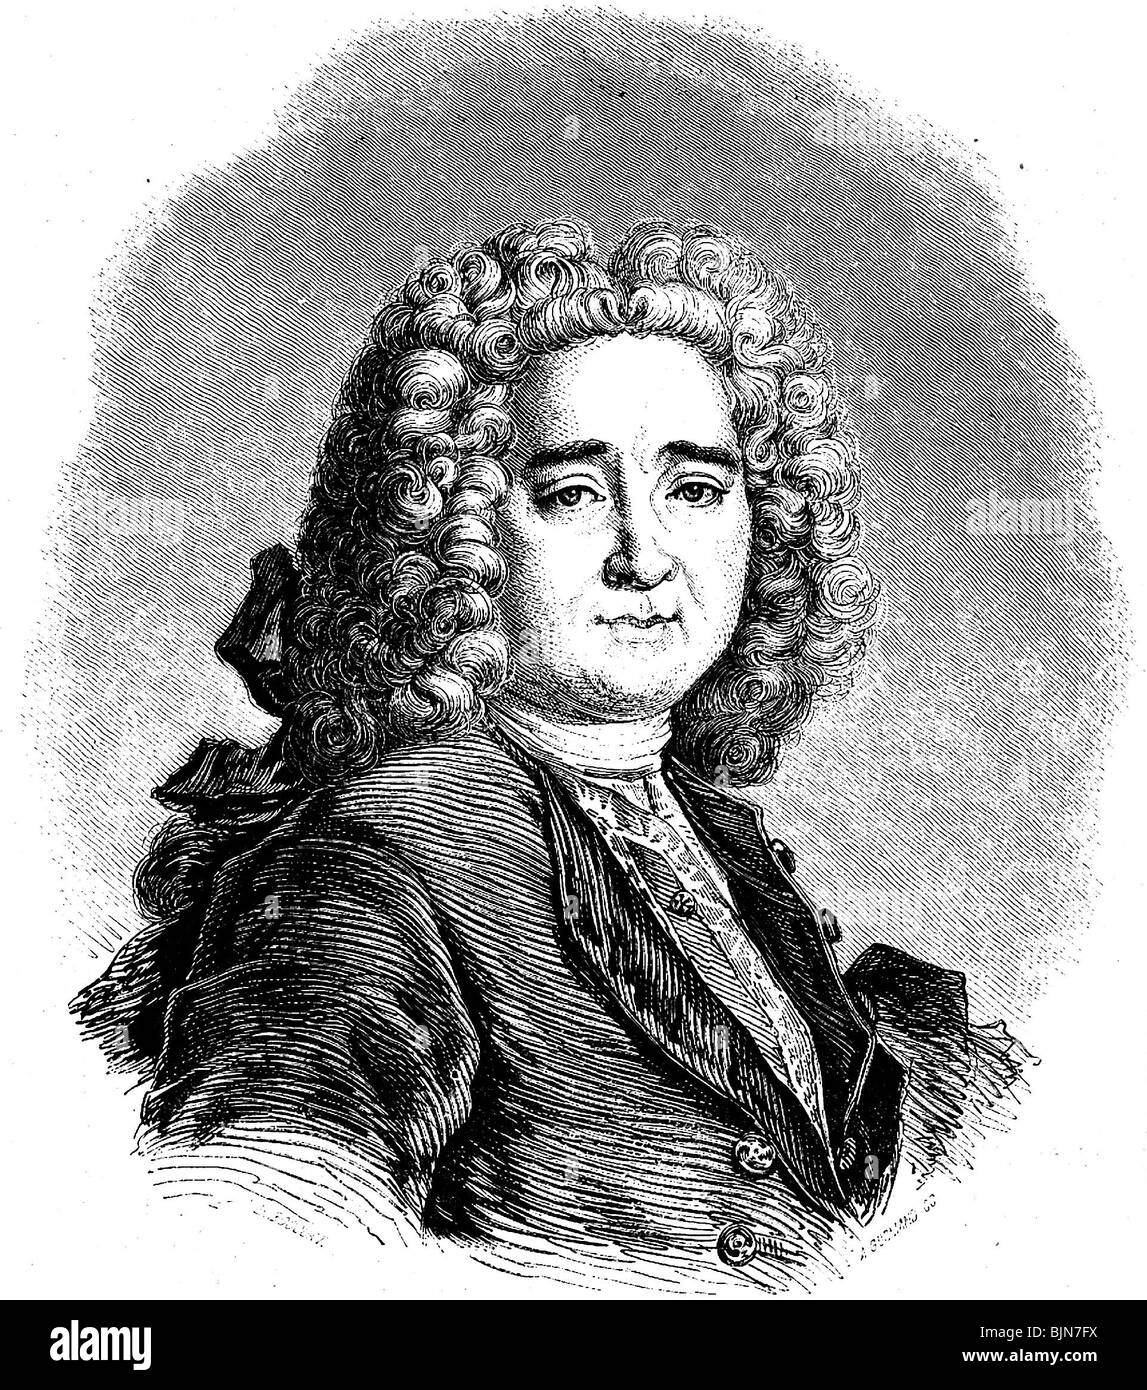 Oudry, Jean Baptiste, 17.3.1686 - 3.4.1755, French painter, printmaker, professor in Paris, wood engraving, 19th century, after painting by Bocourt, Artist's Copyright has not to be cleared Stock Photo